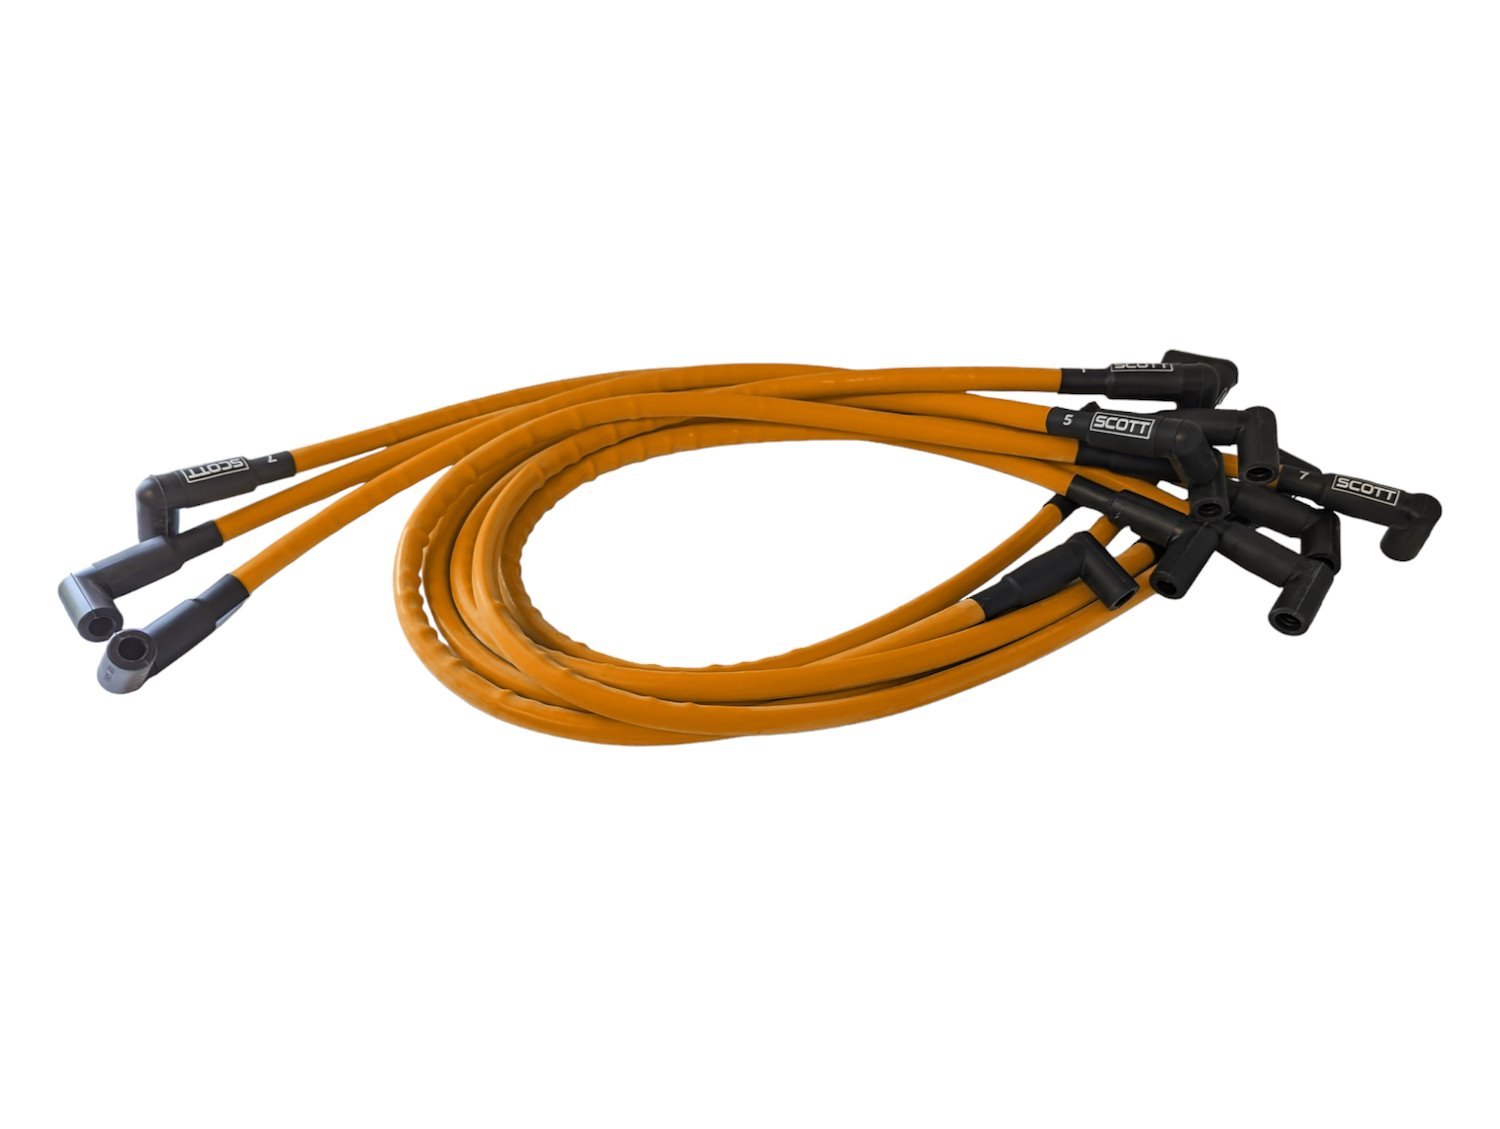 SPW-CH-437-5 High-Performance Silicone-Sleeved Spark Plug Wire Set for Small Block Chevy, Over & Under [Orange]